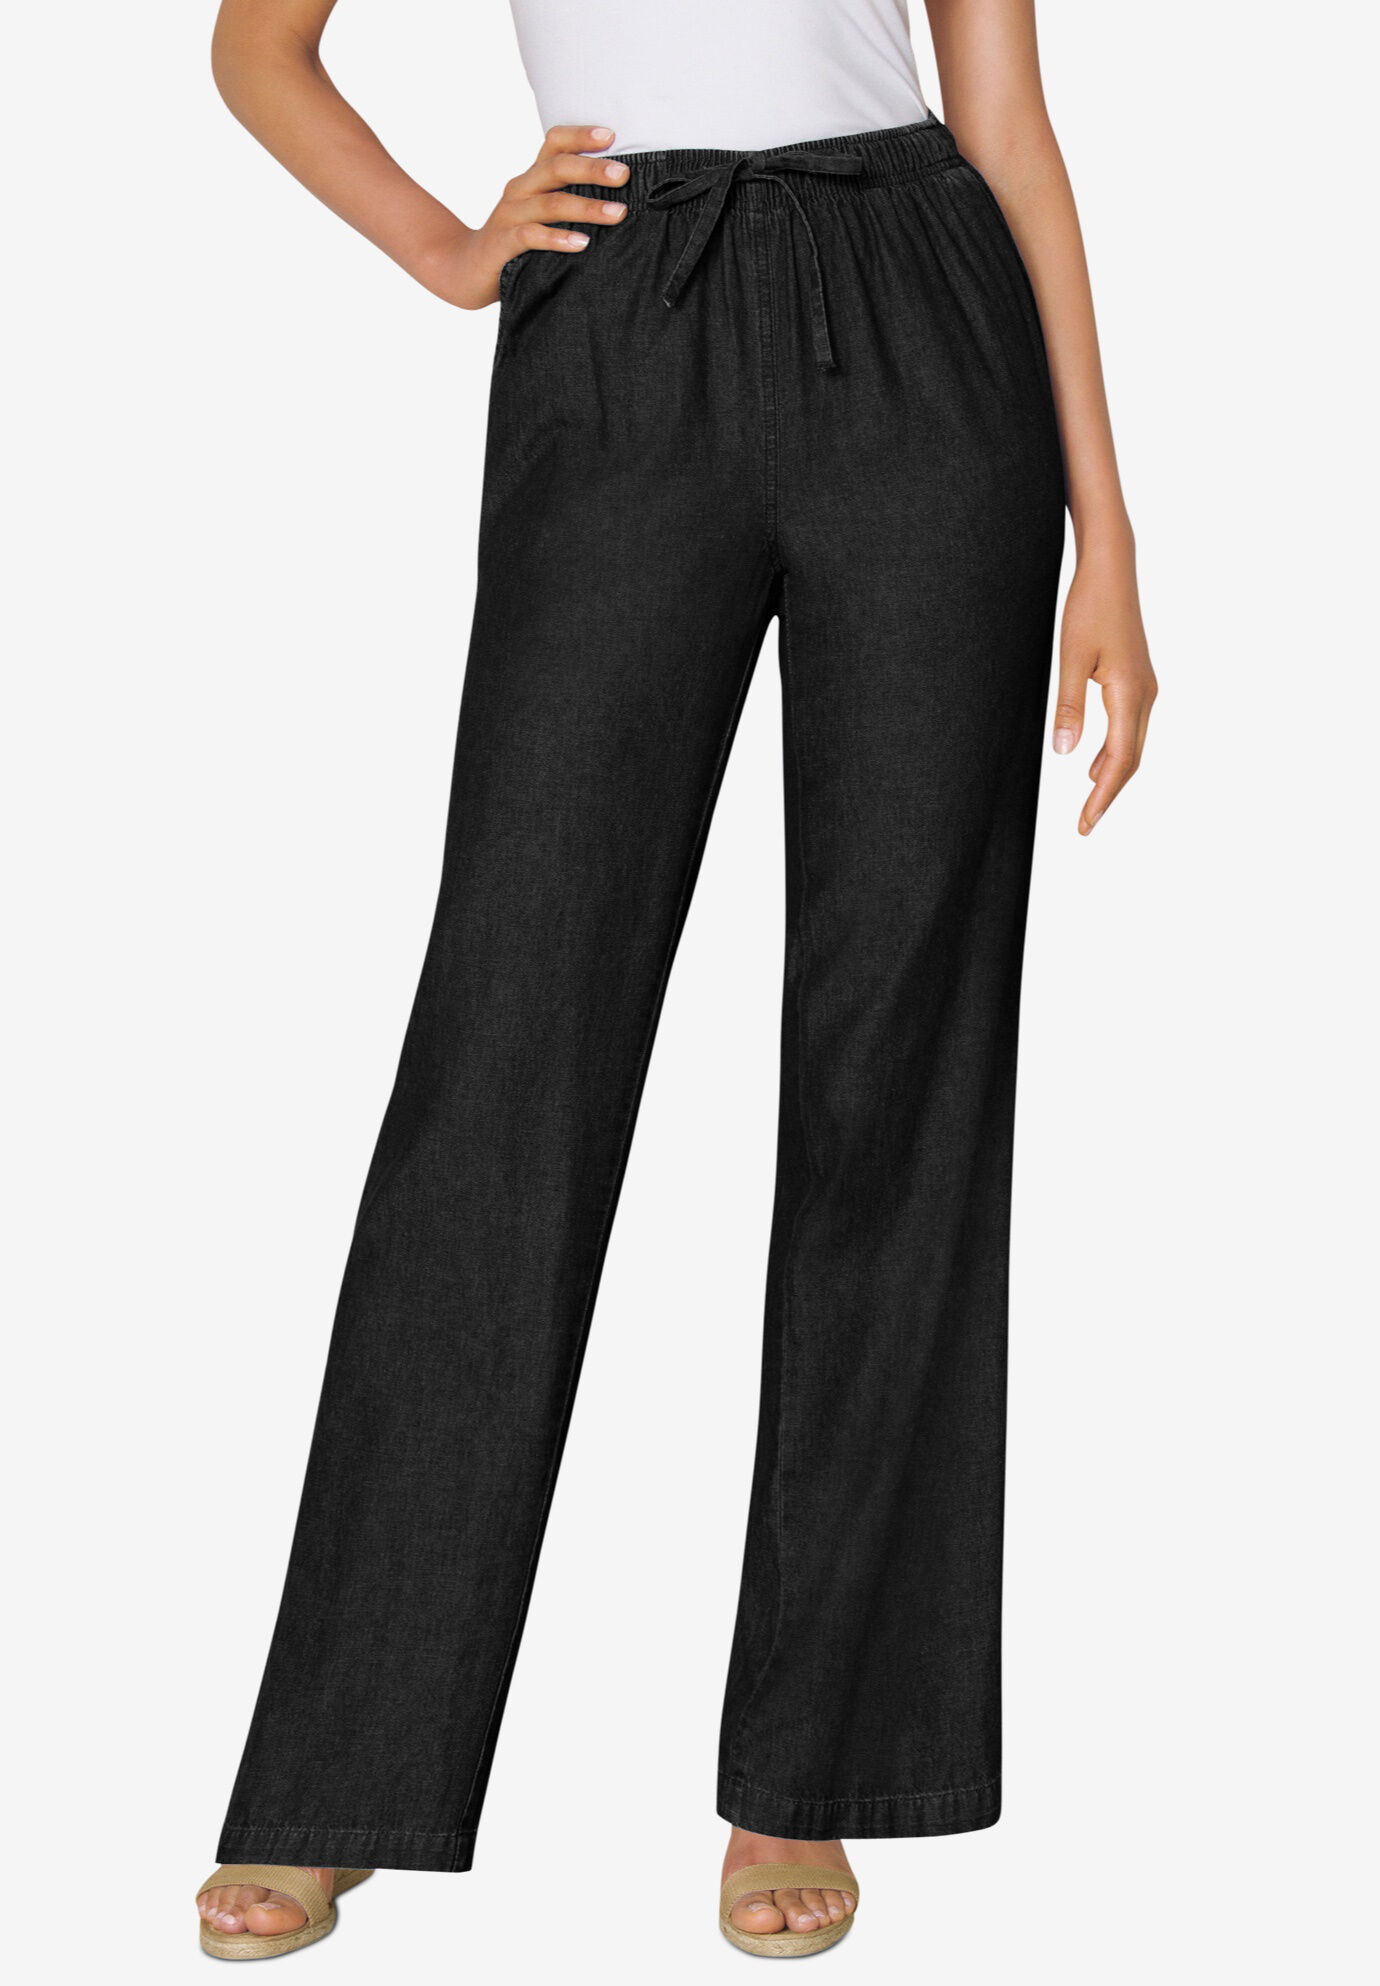 Solid Black Ruffled Flare Leg Pants Mid Rise Stretch Pull On Long Dressy Career 